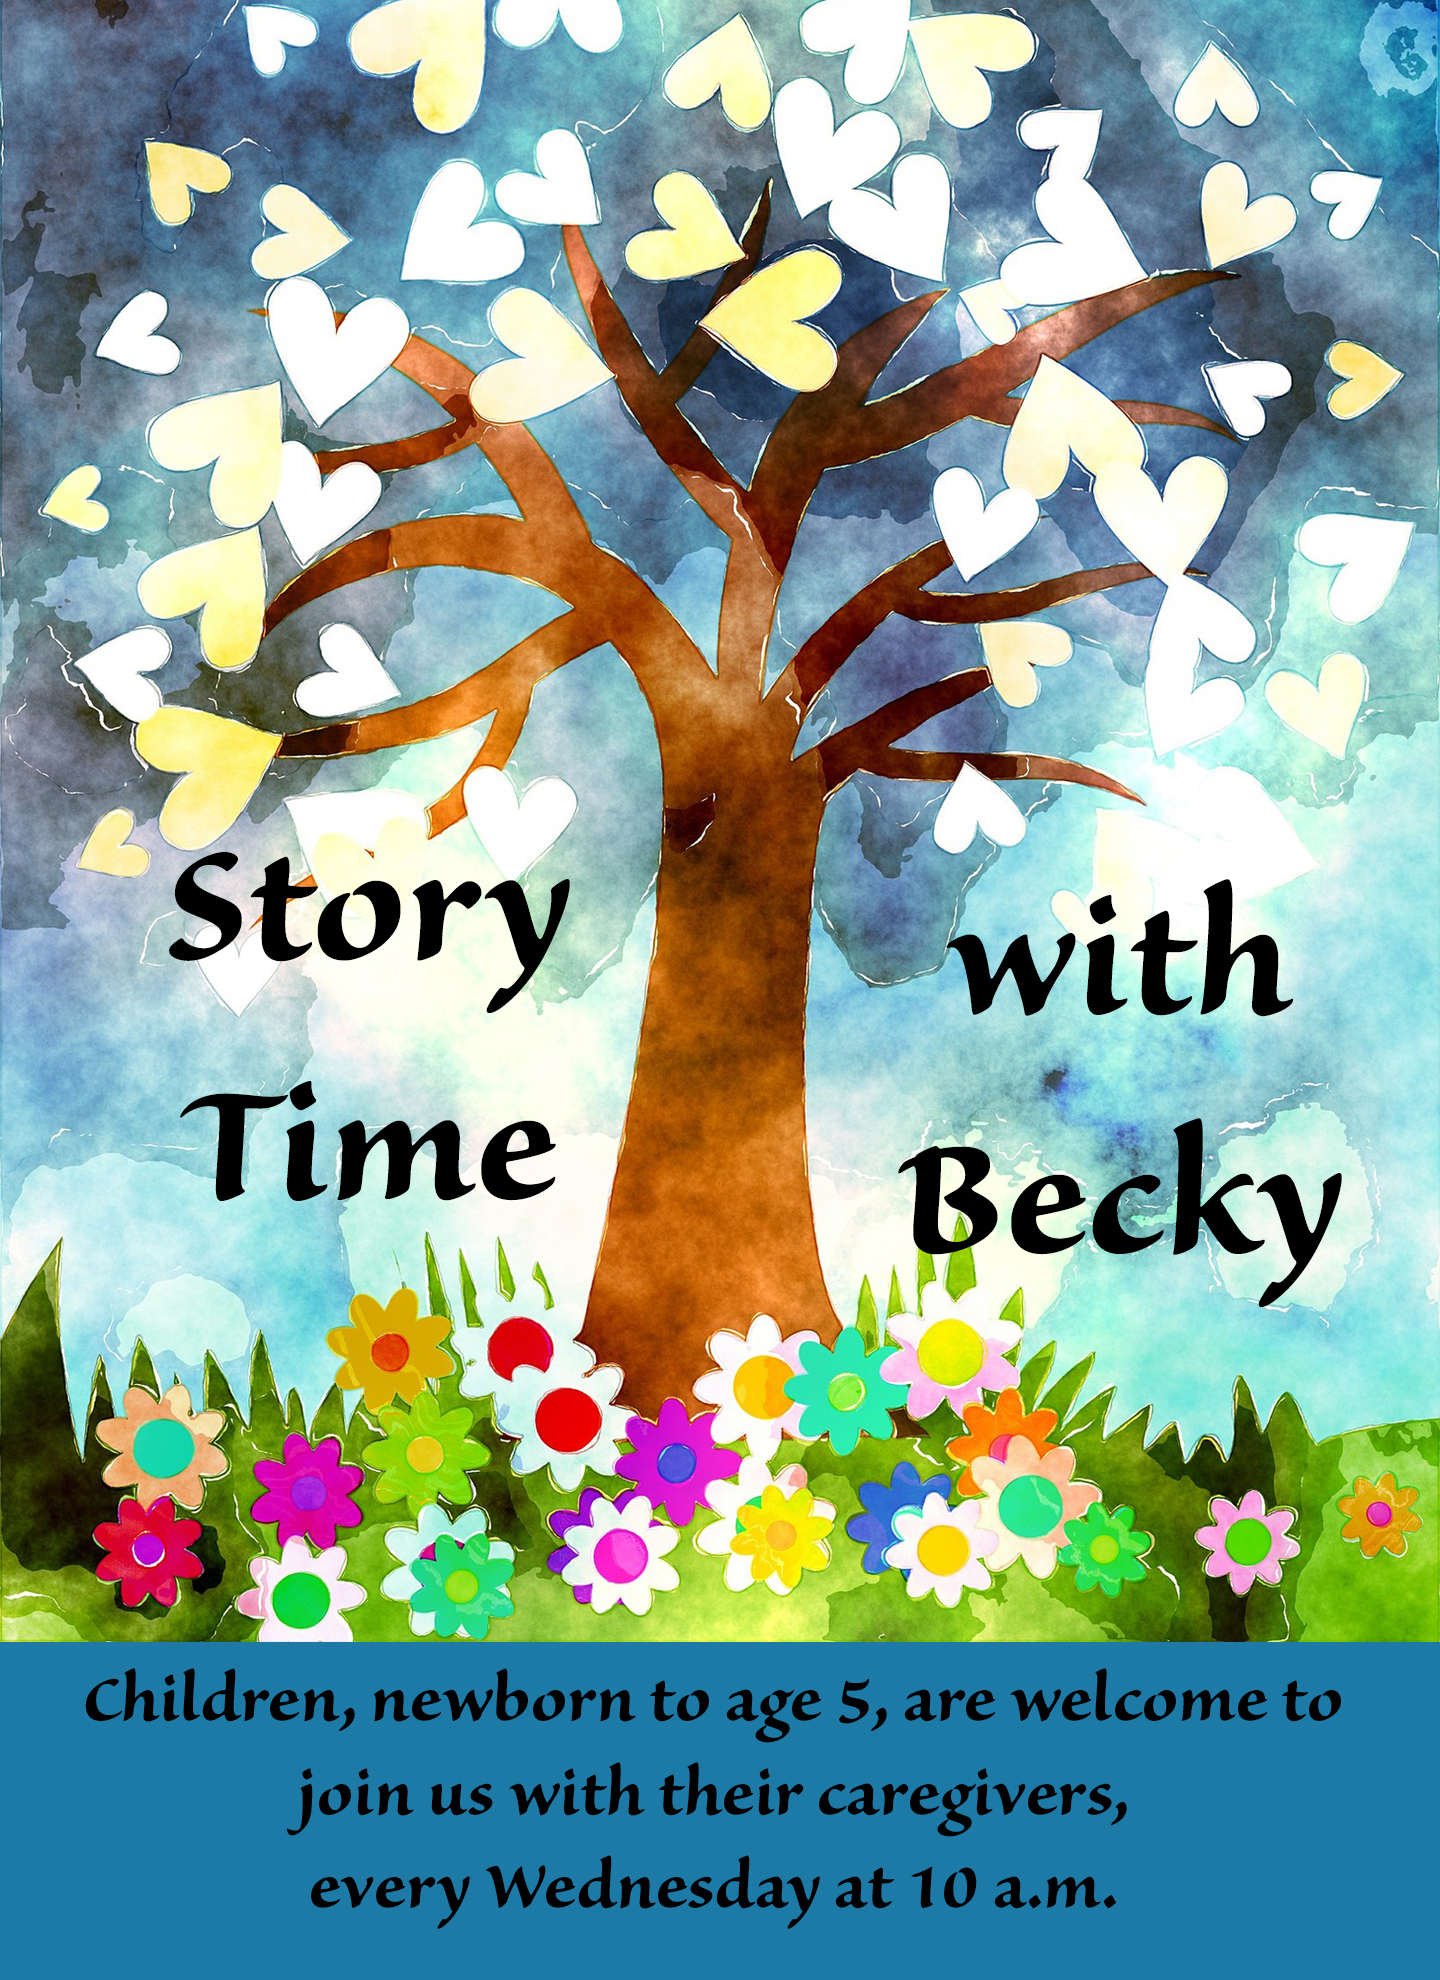 Story Time with Becky. Children, newborn to age 5, are welcome to join us with their caregivers, every Wednesday at 10 a.m.